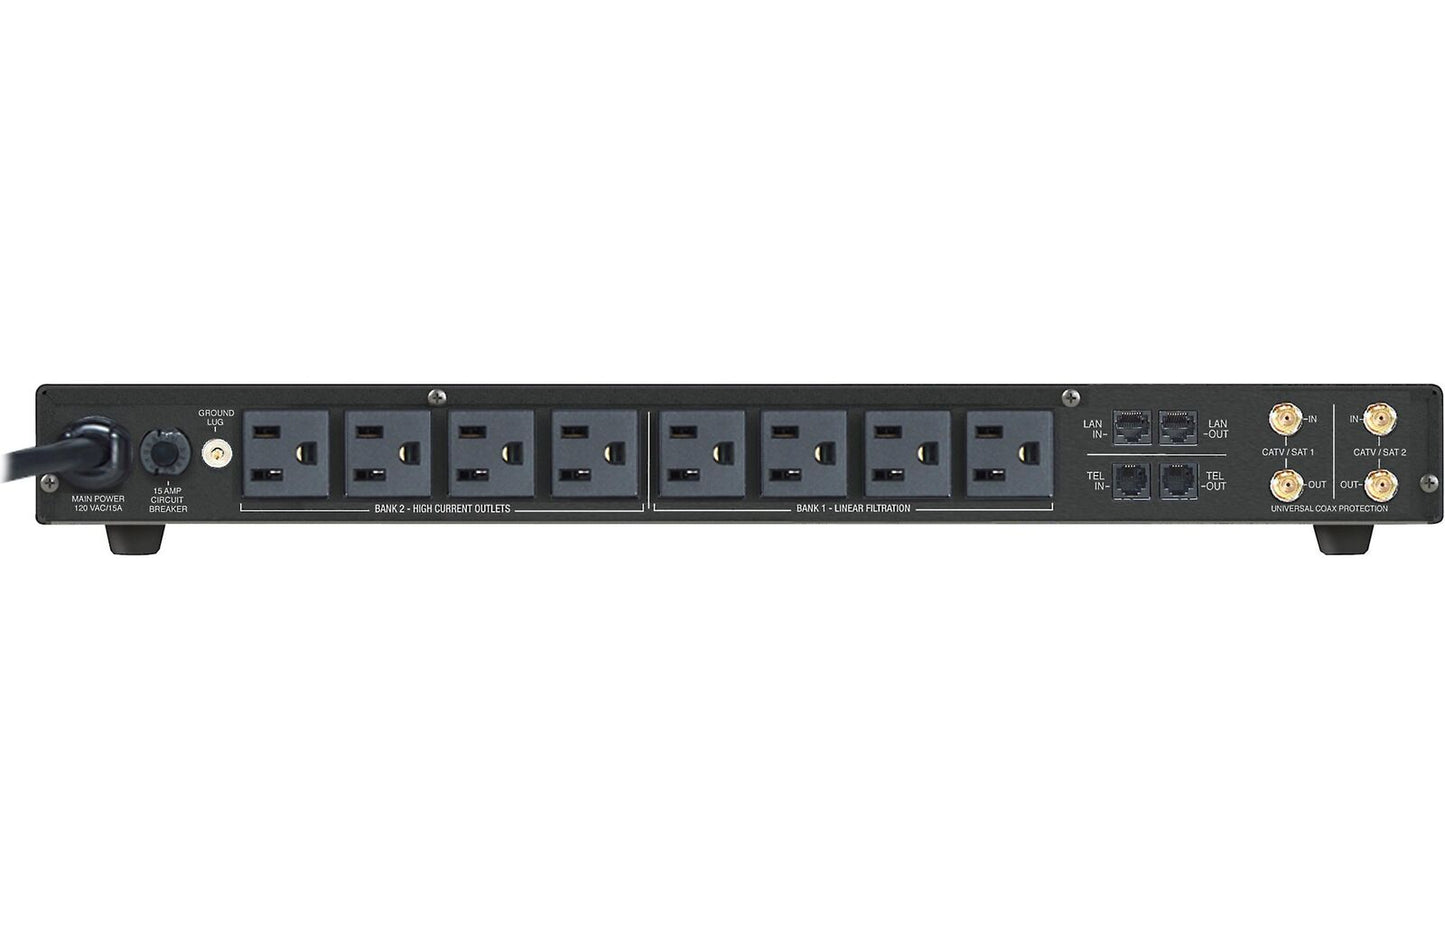 Panamax MR4300 Power line conditioner and surge protector